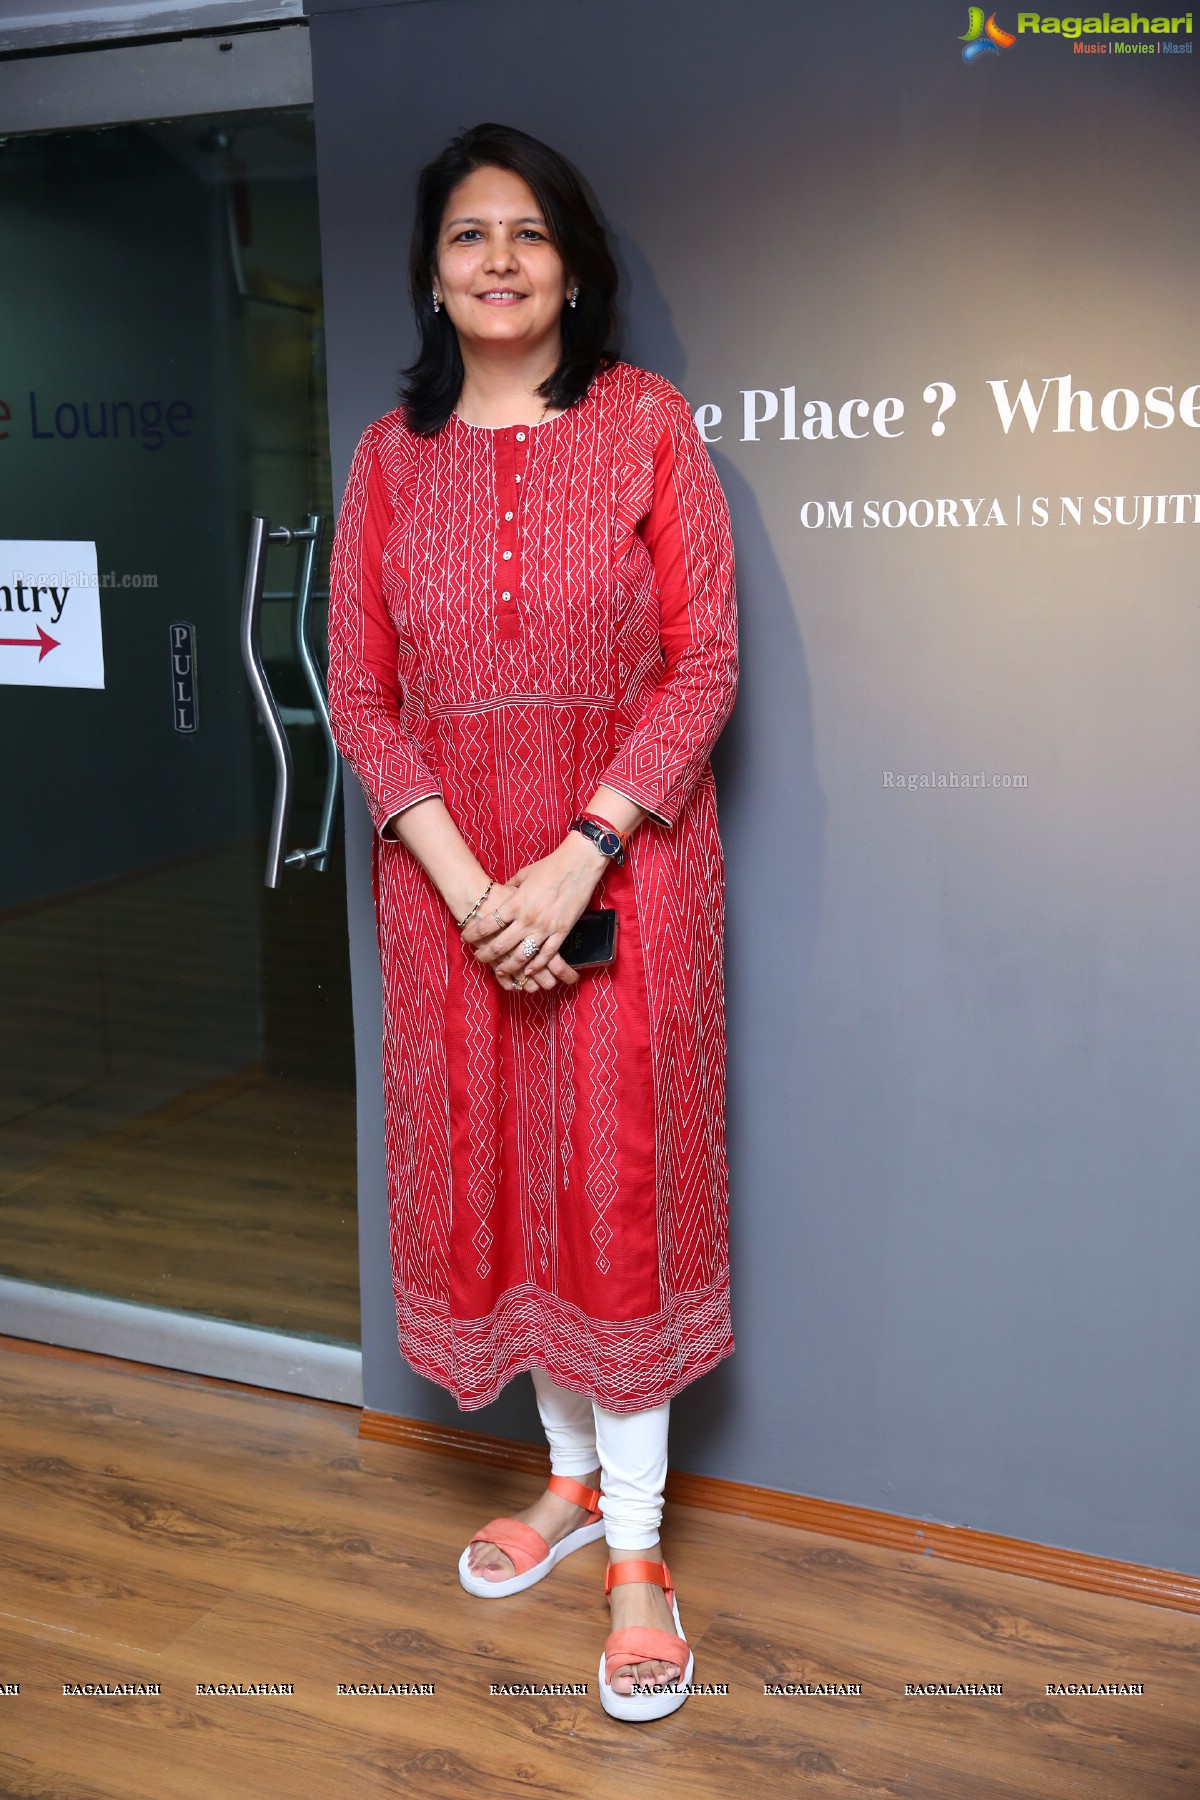 Whose Place? Whose Memory? Whose Archive? Hosted by Kalakriti Art Gallery